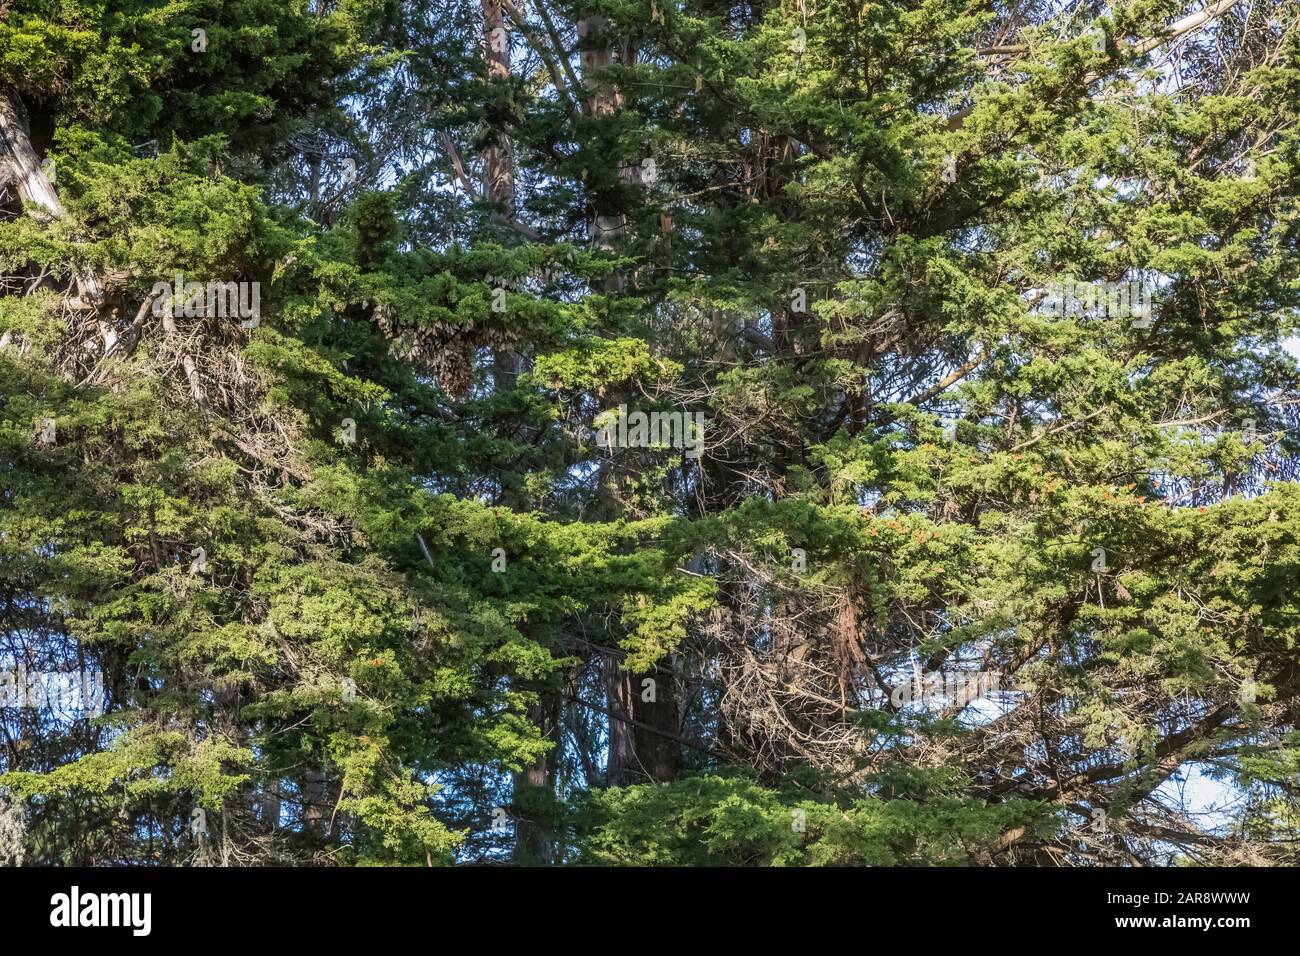 Monarch Butterflies, Danaus plexippus, clustered together in a grove of Monterey Cypress (look carefully) for warmth at their winter migration destina Stock Photo